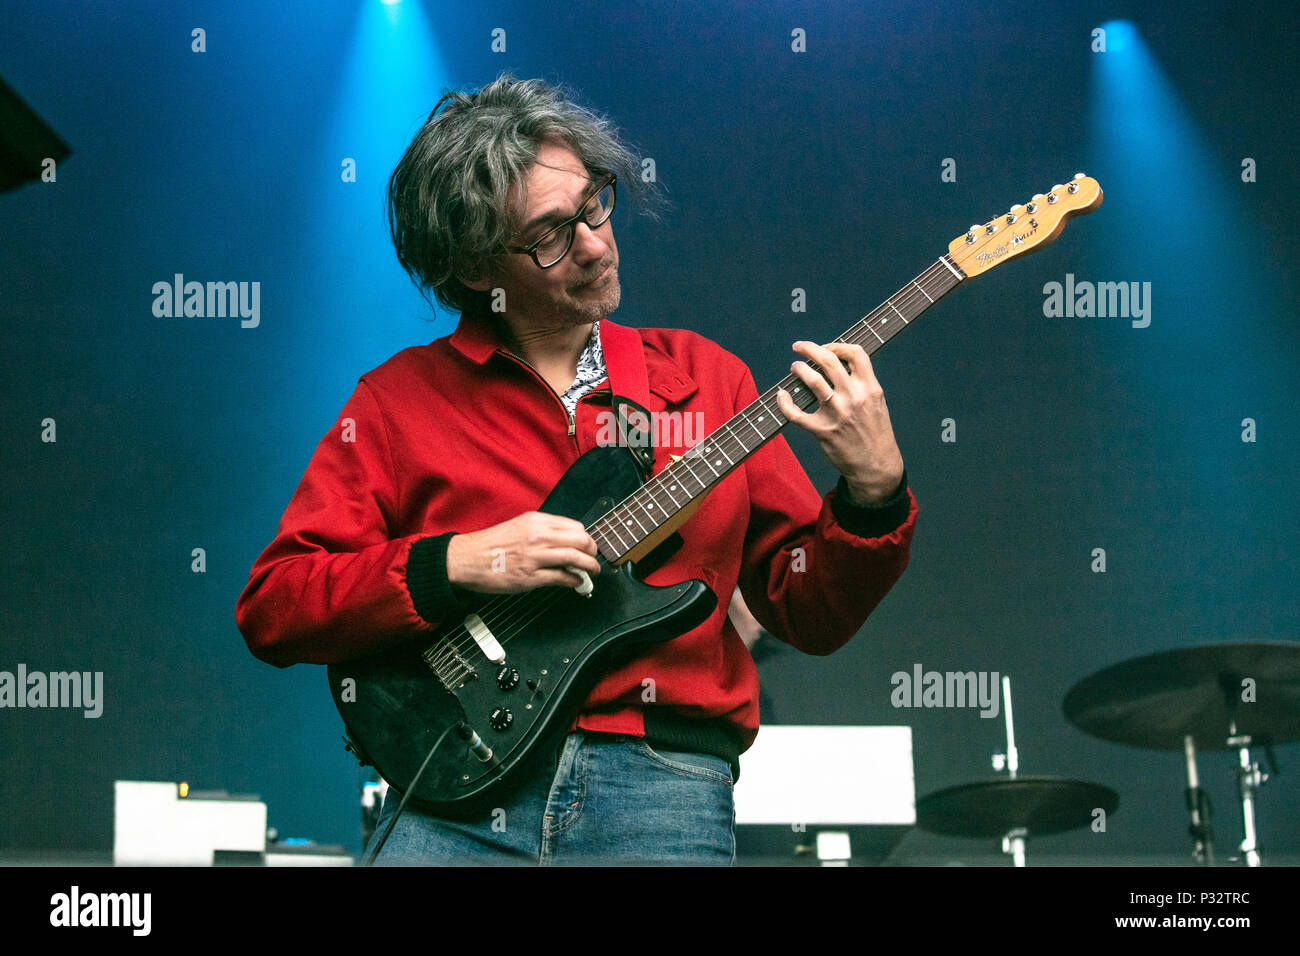 Norway, Oslo - June 16, 2018. The French indie pop band Phoenix performs a  live concert during the Norwegian music festival Piknik i Parken 2018 in  Oslo. Here guitarist Laurent Brancowitz is